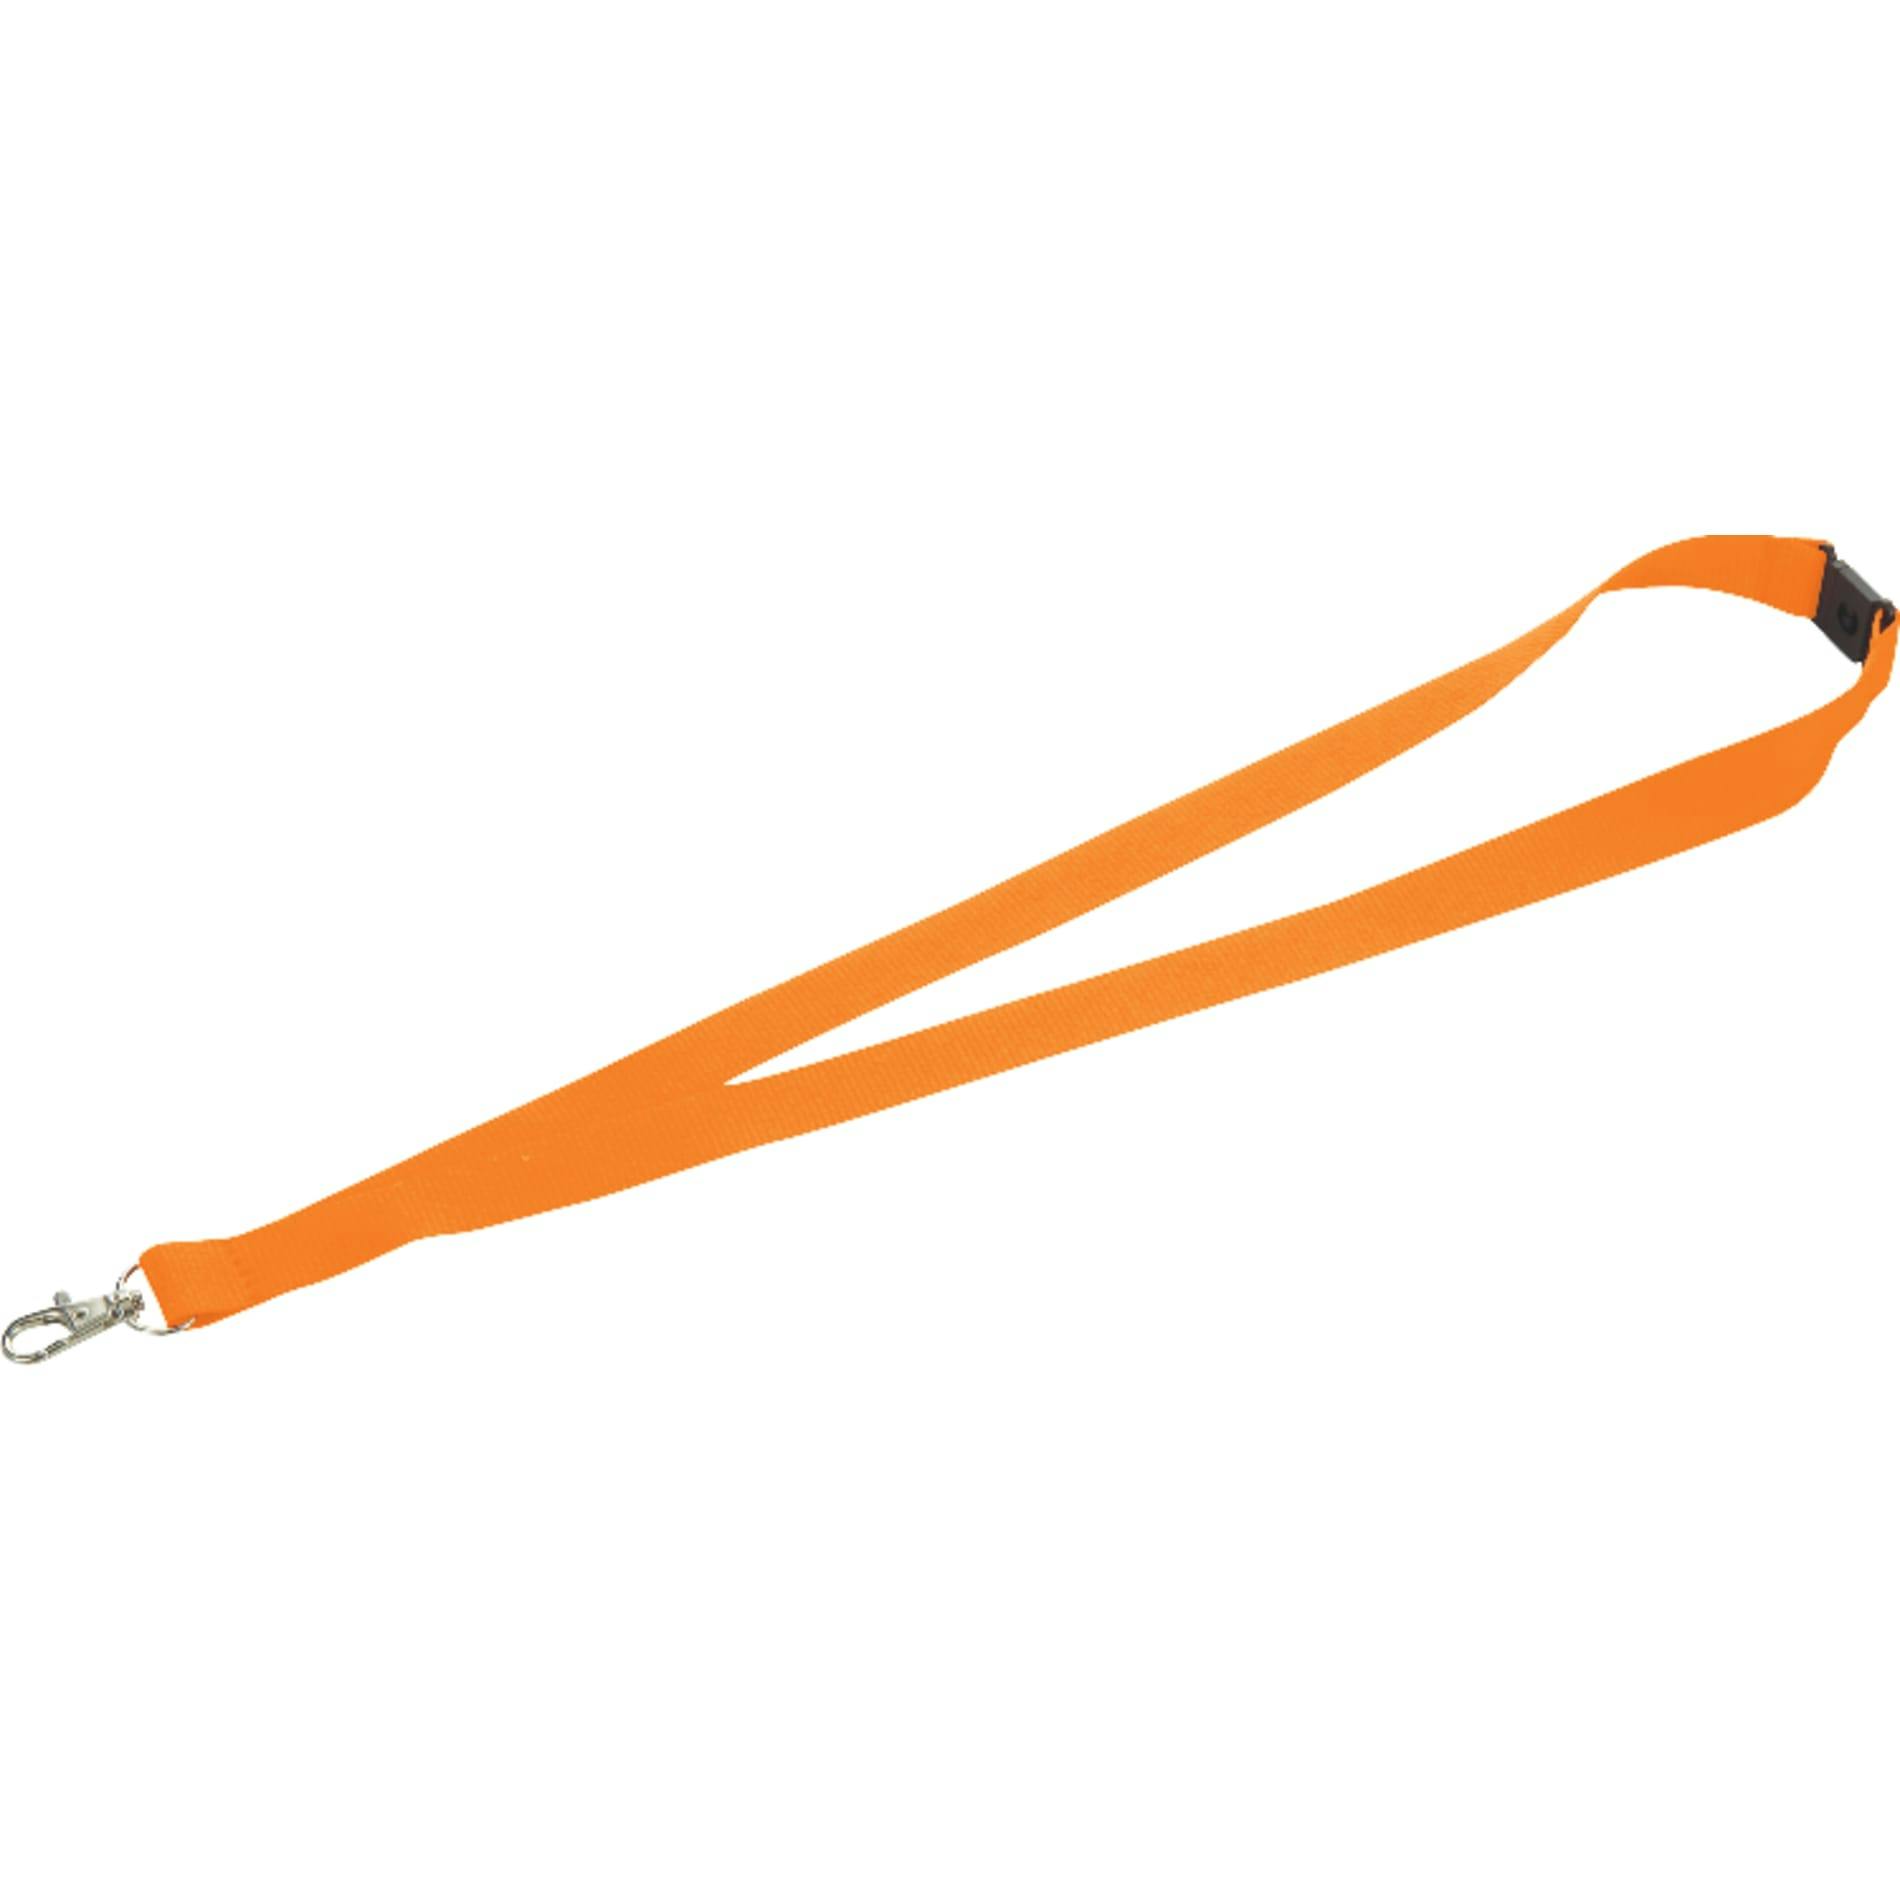 Lanyard with Lobster Clip - additional Image 1